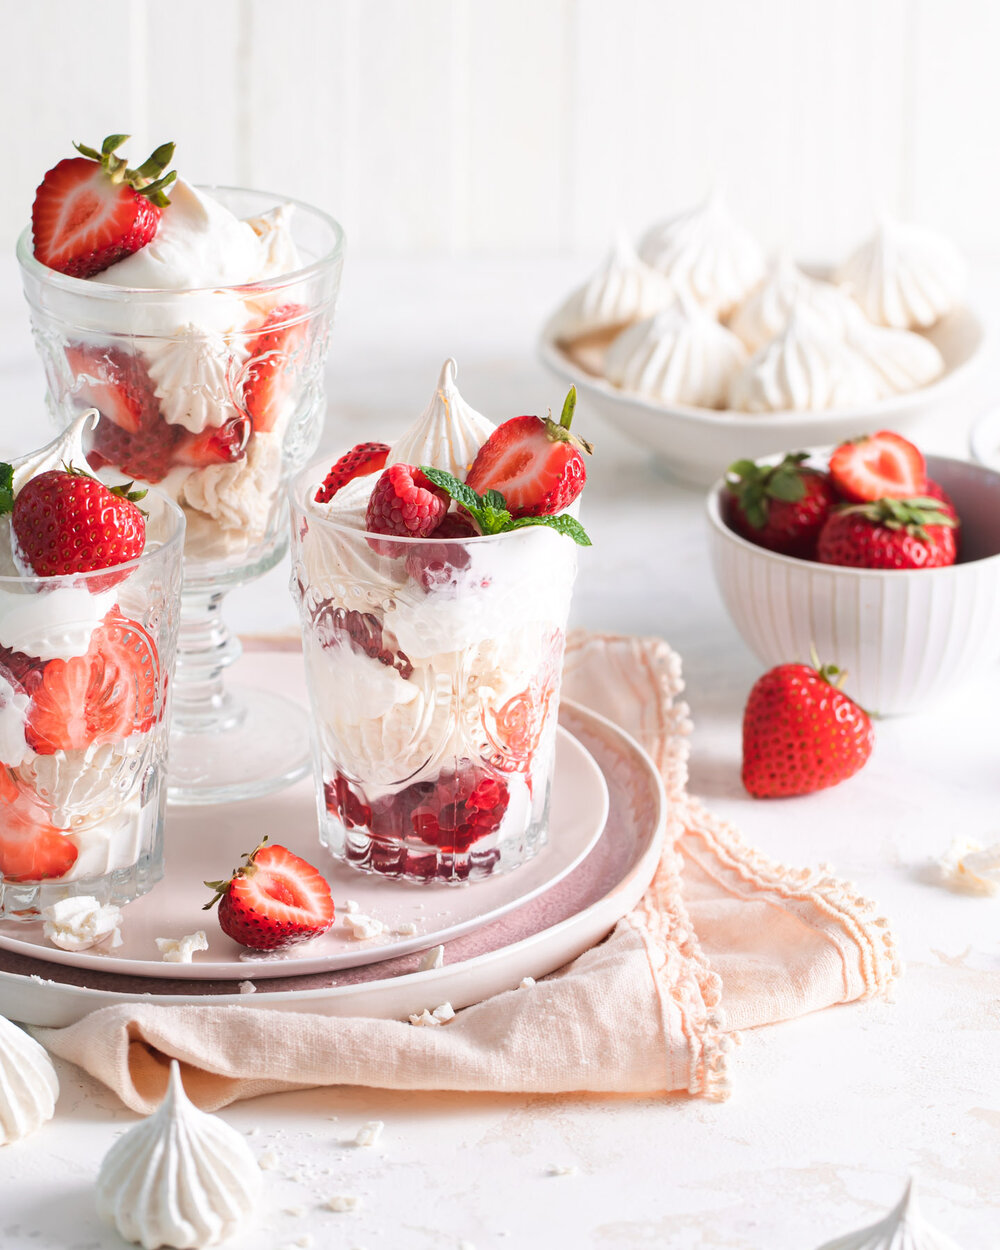 Layered Eton mess with French meringue kisses, berries, and cream.